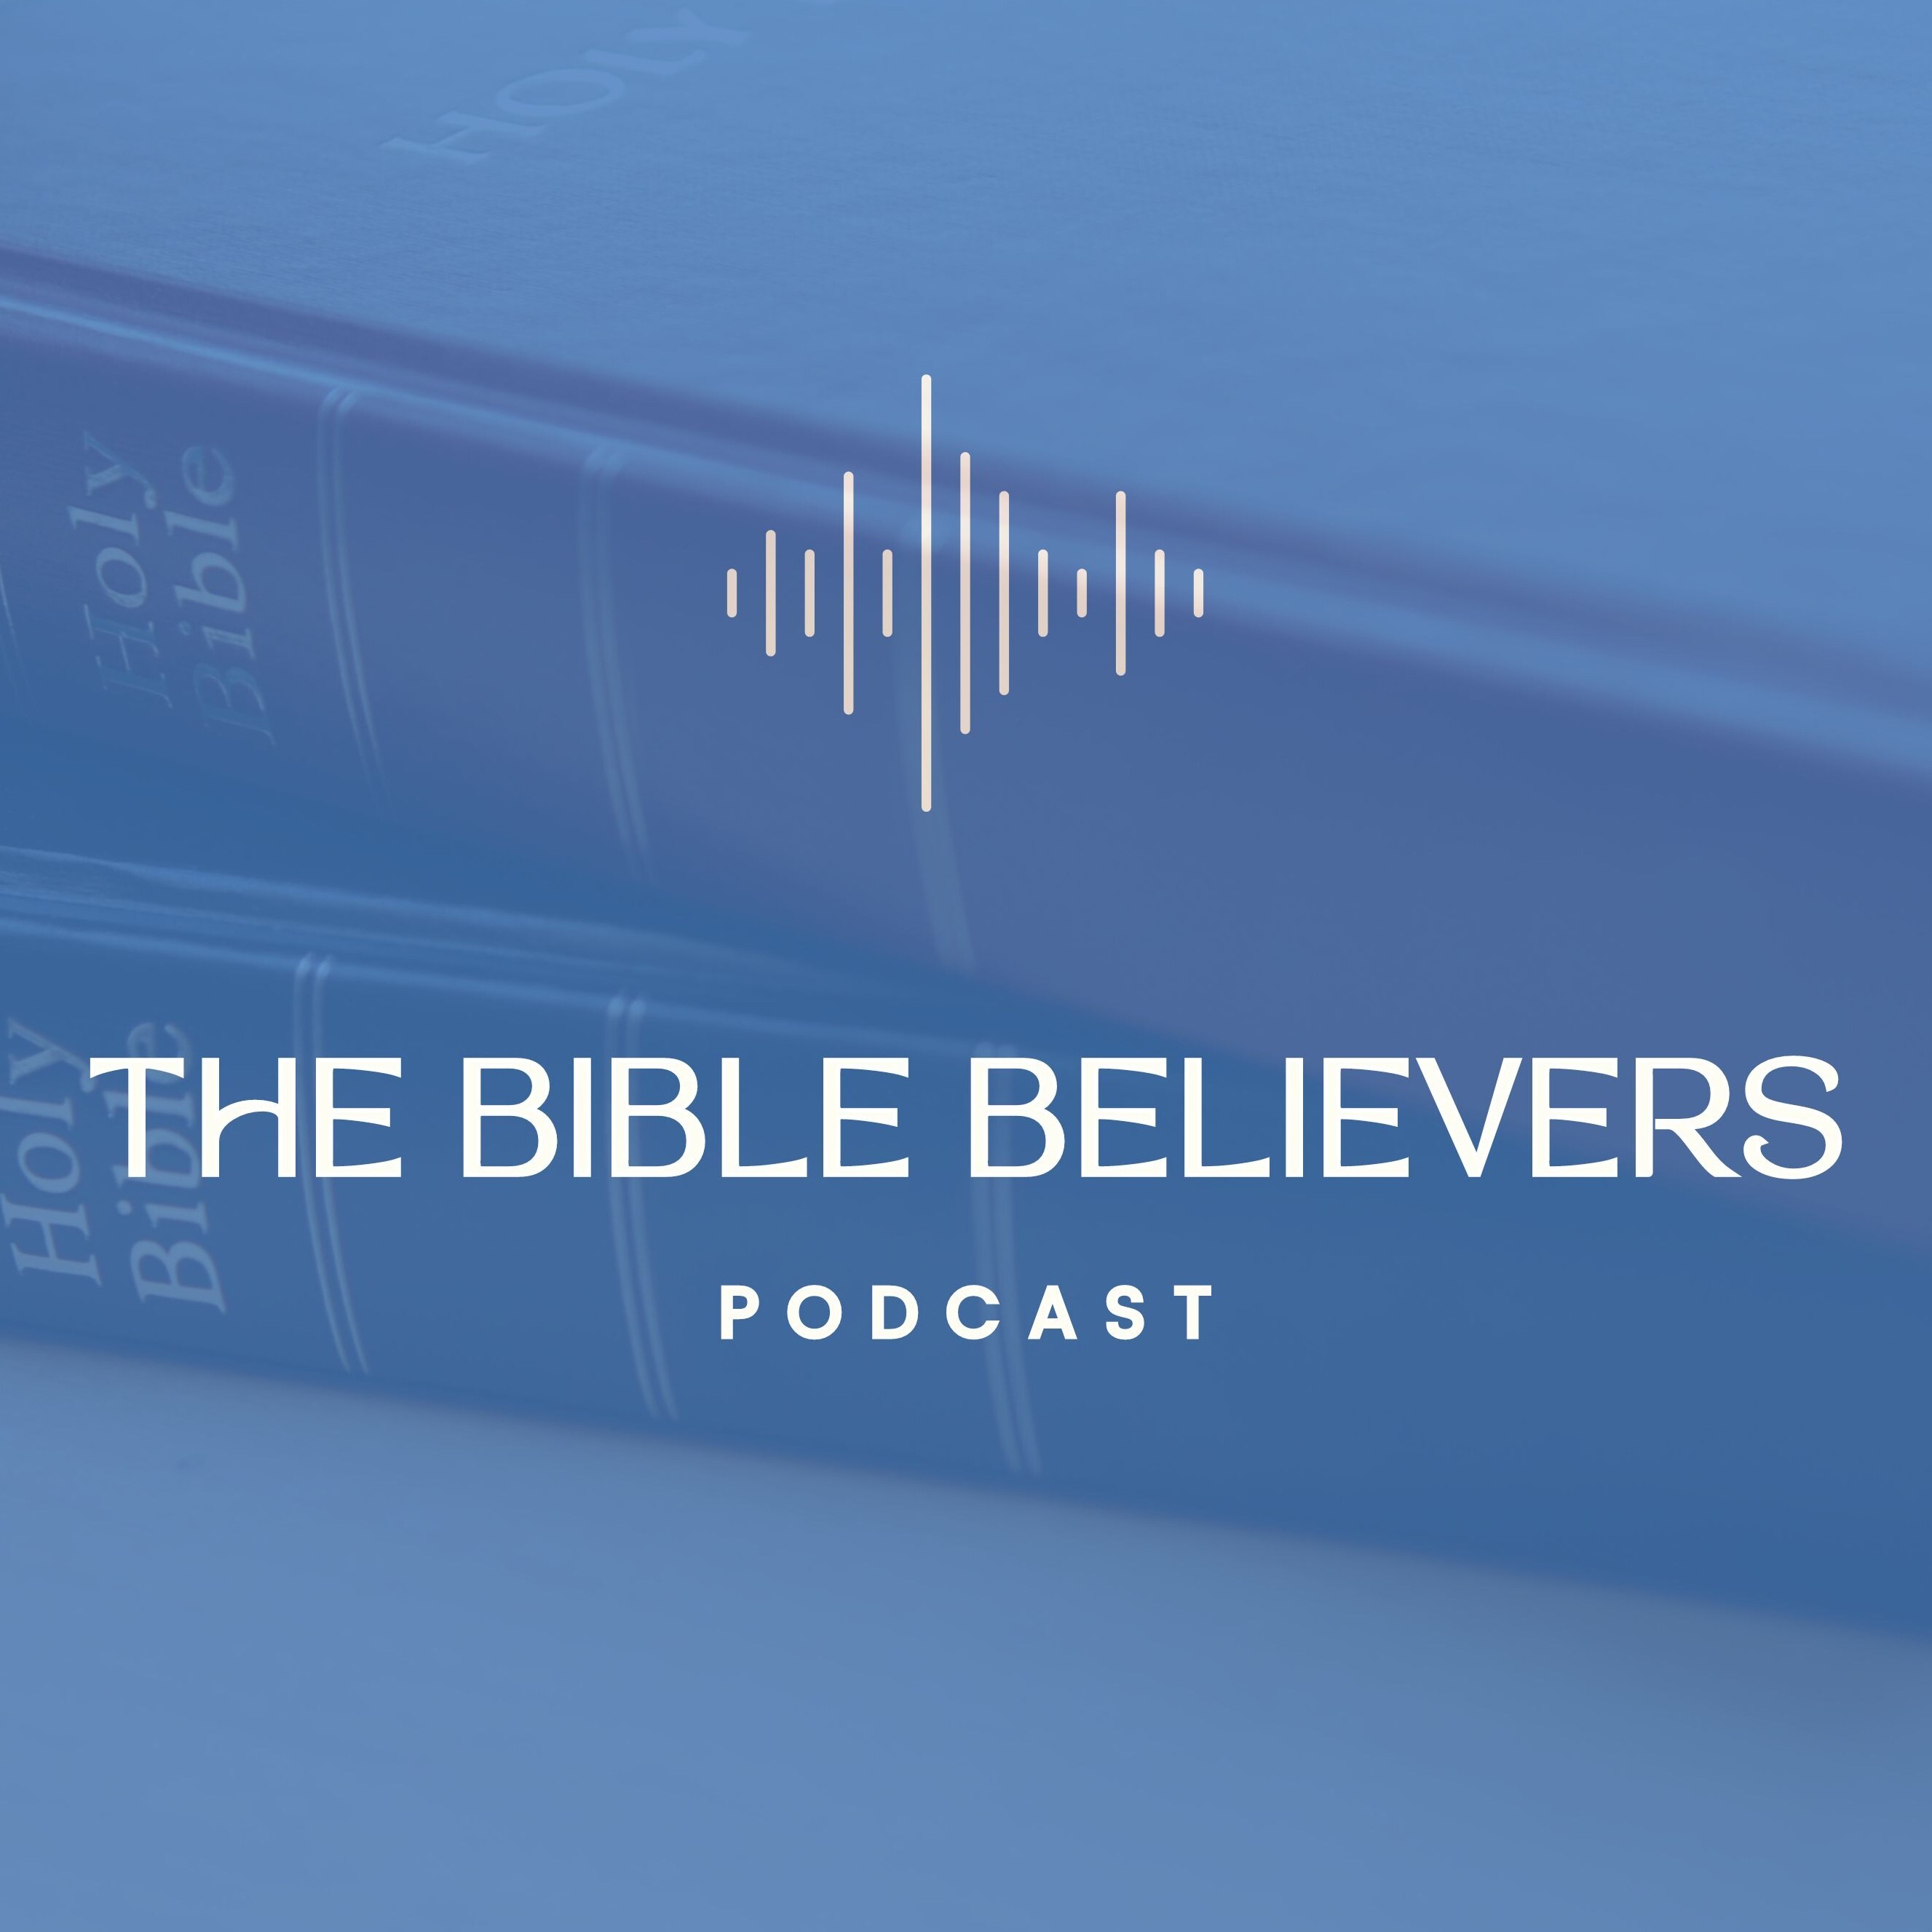 The Bible Believers Podcast